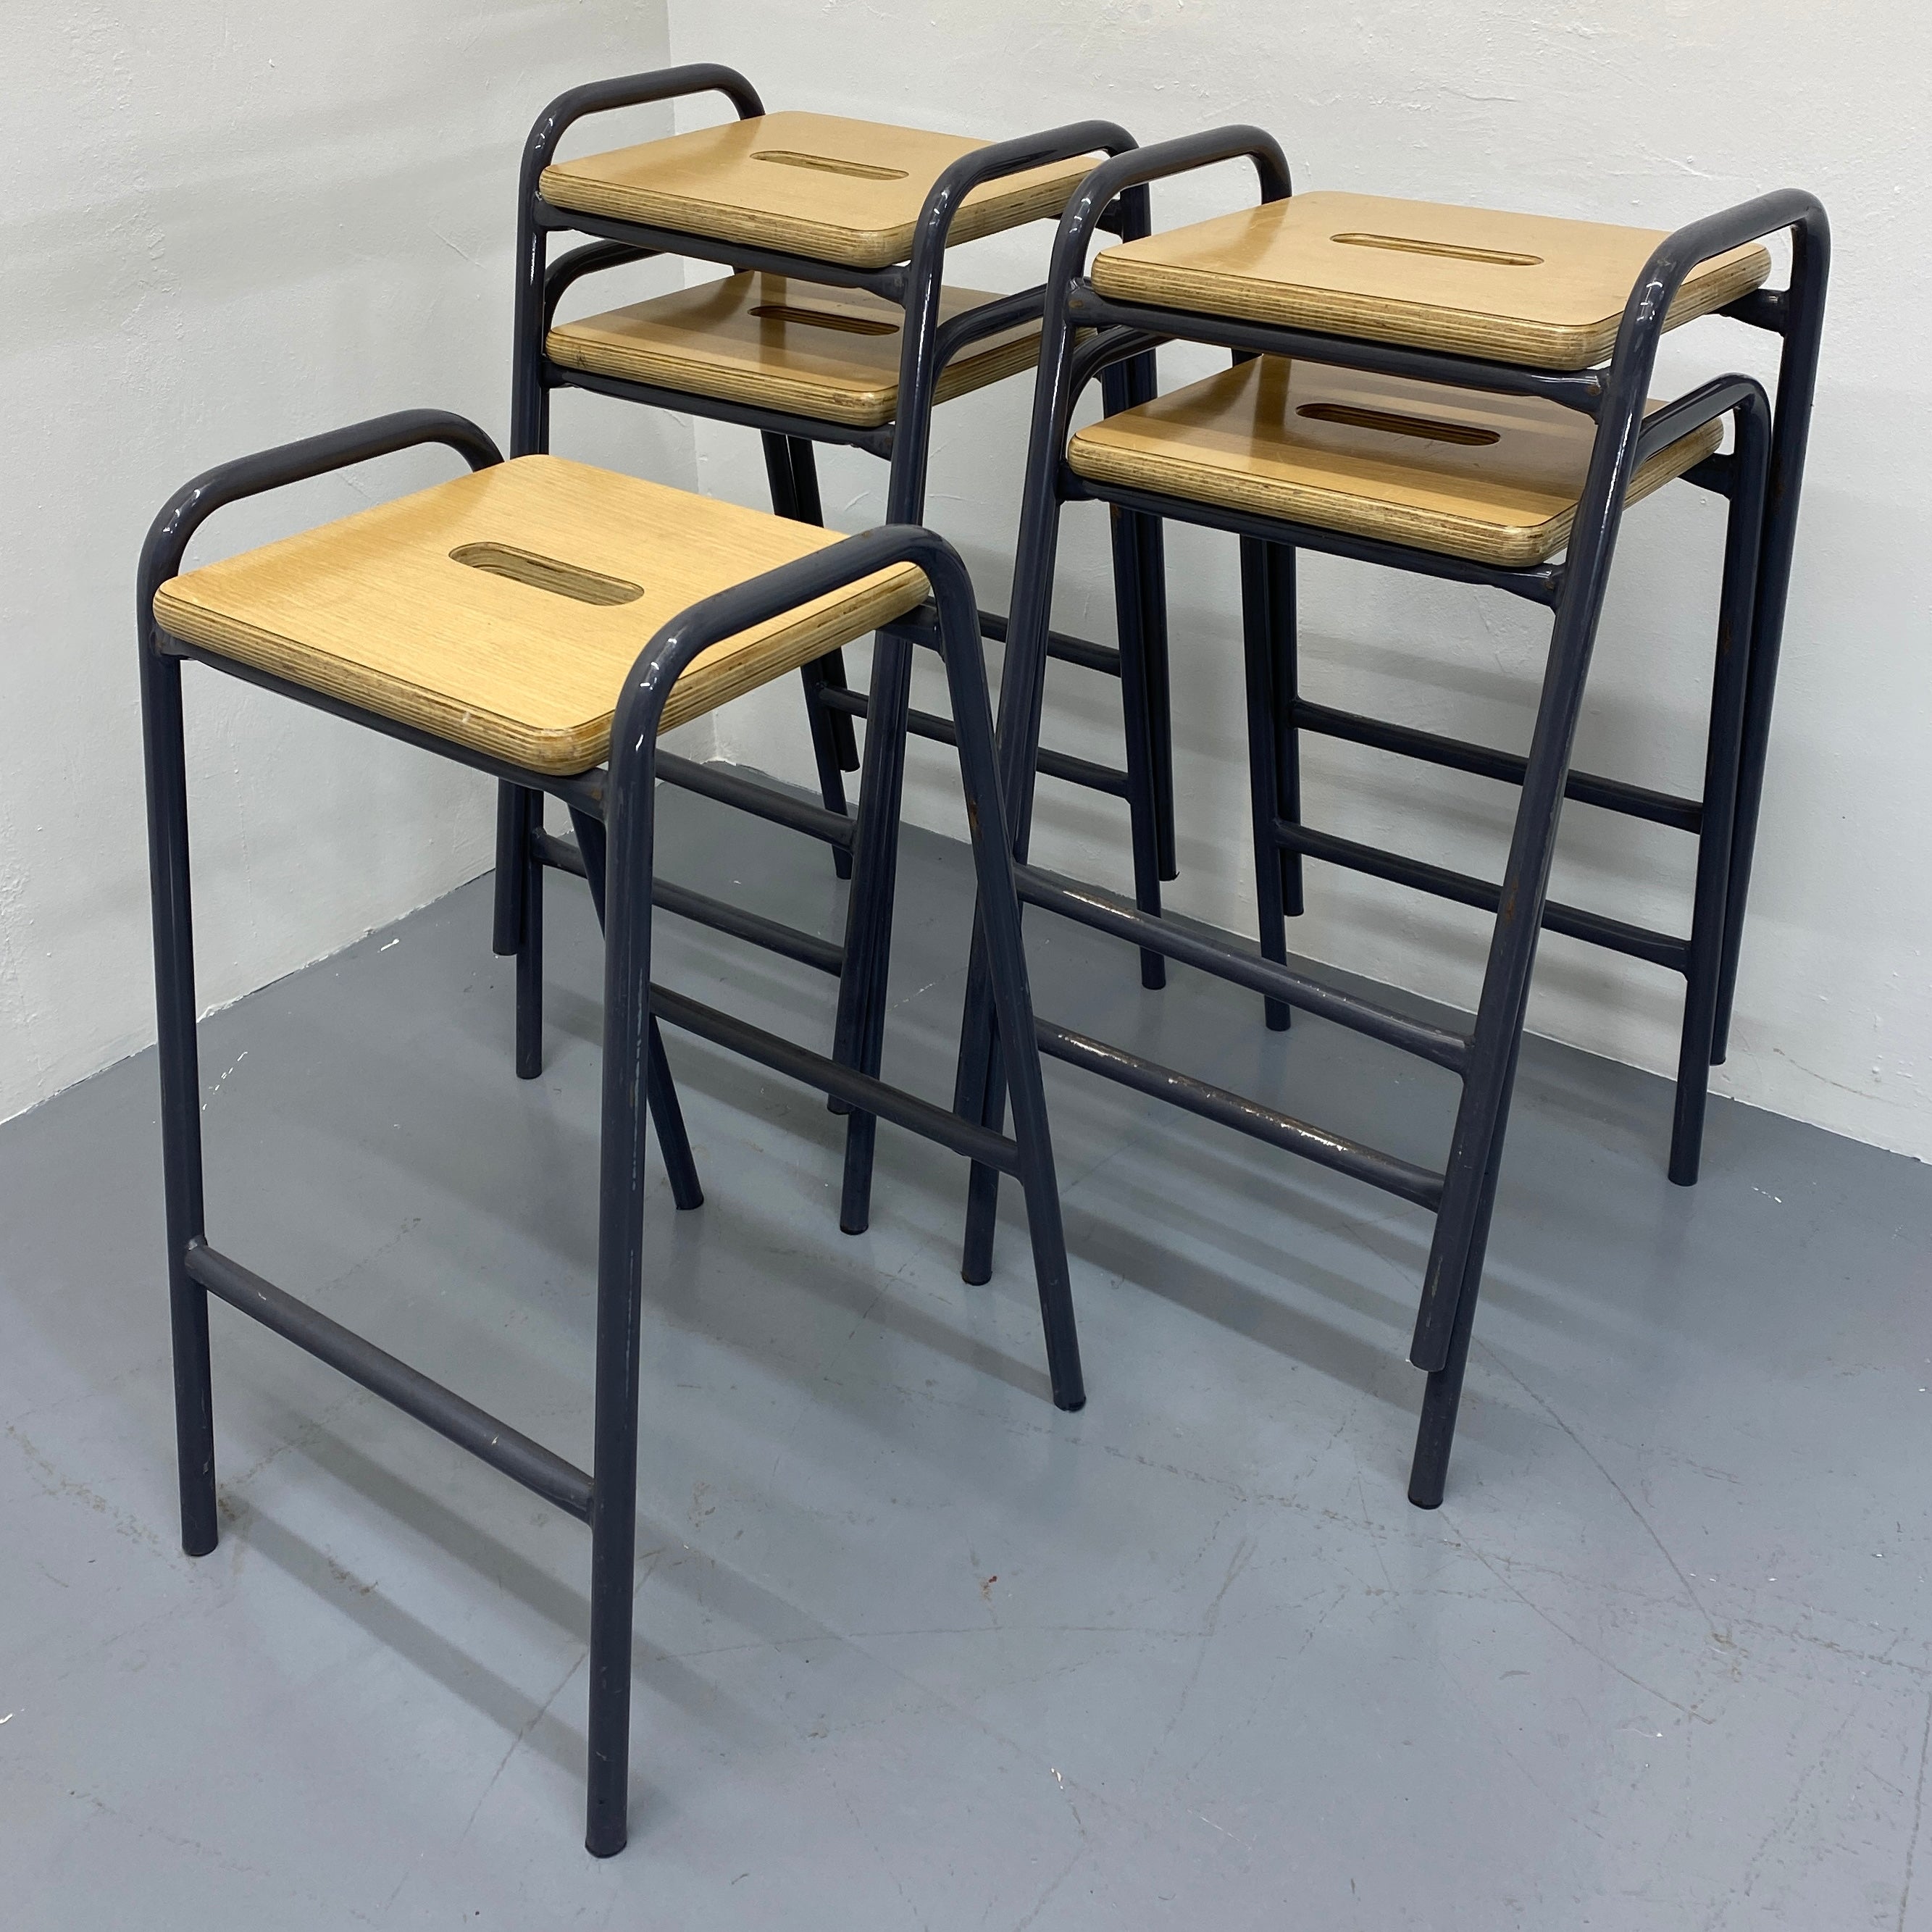 STACKABLE STOOLS